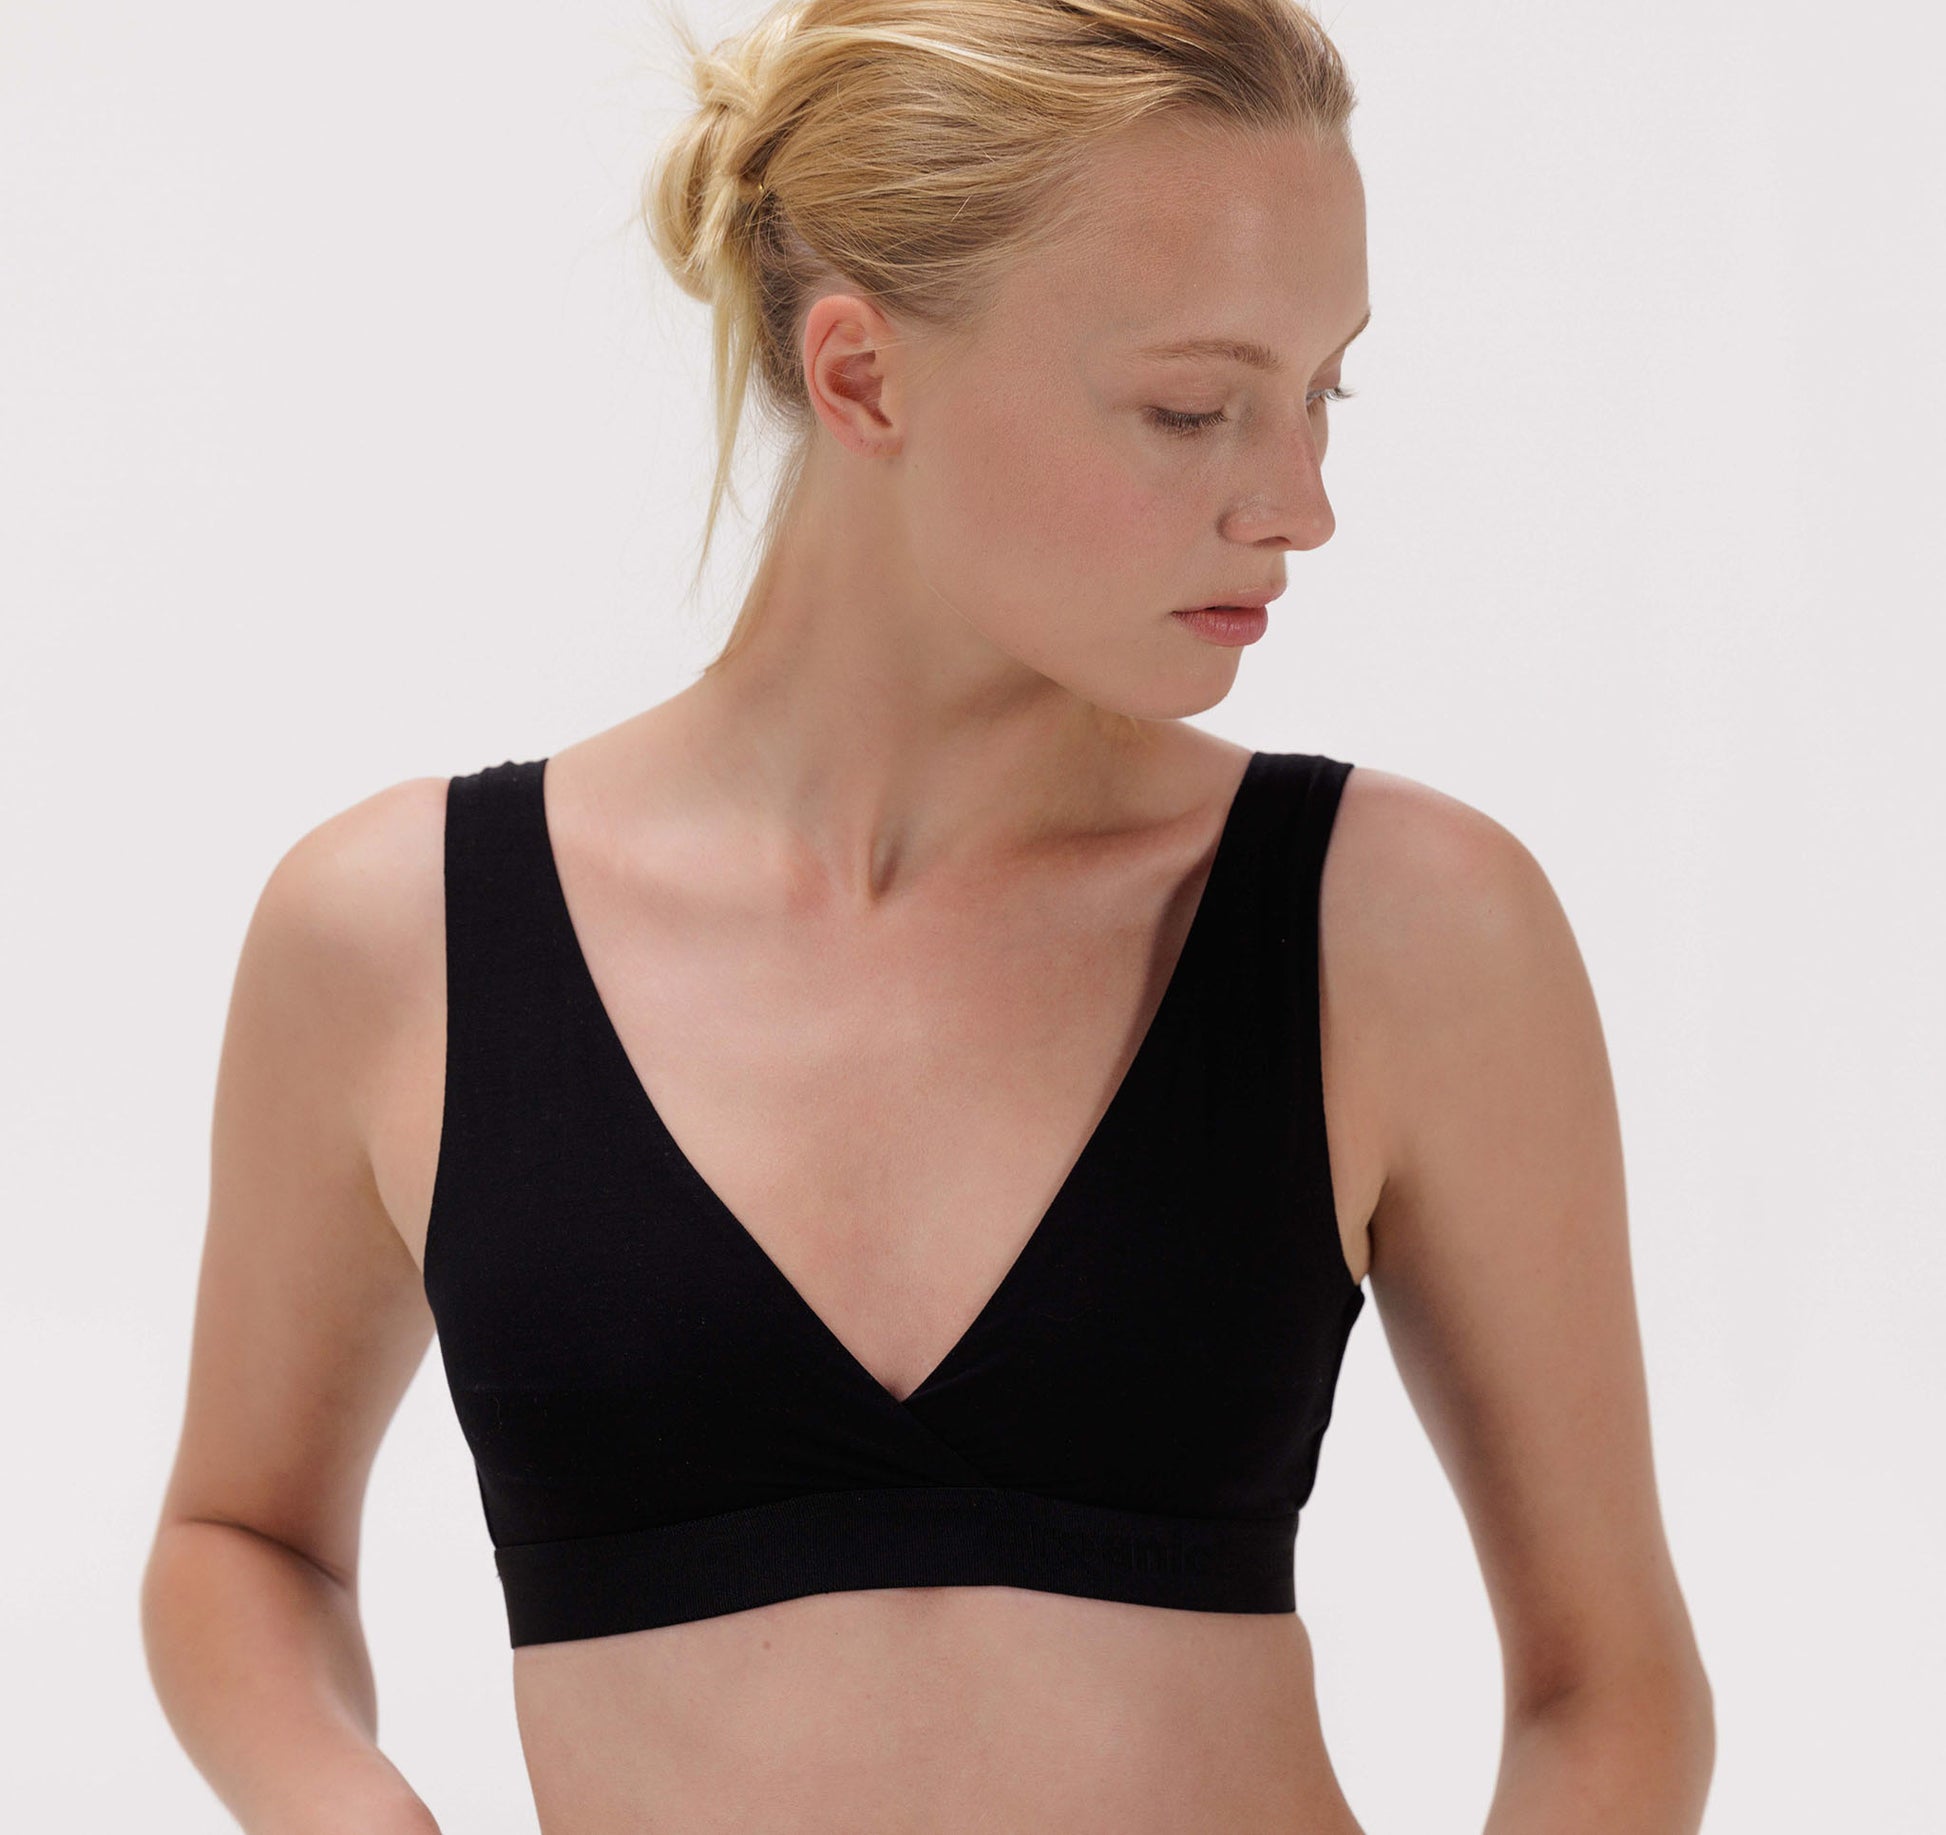 Cotton:On 2-pack seamless triangle bralettes in black